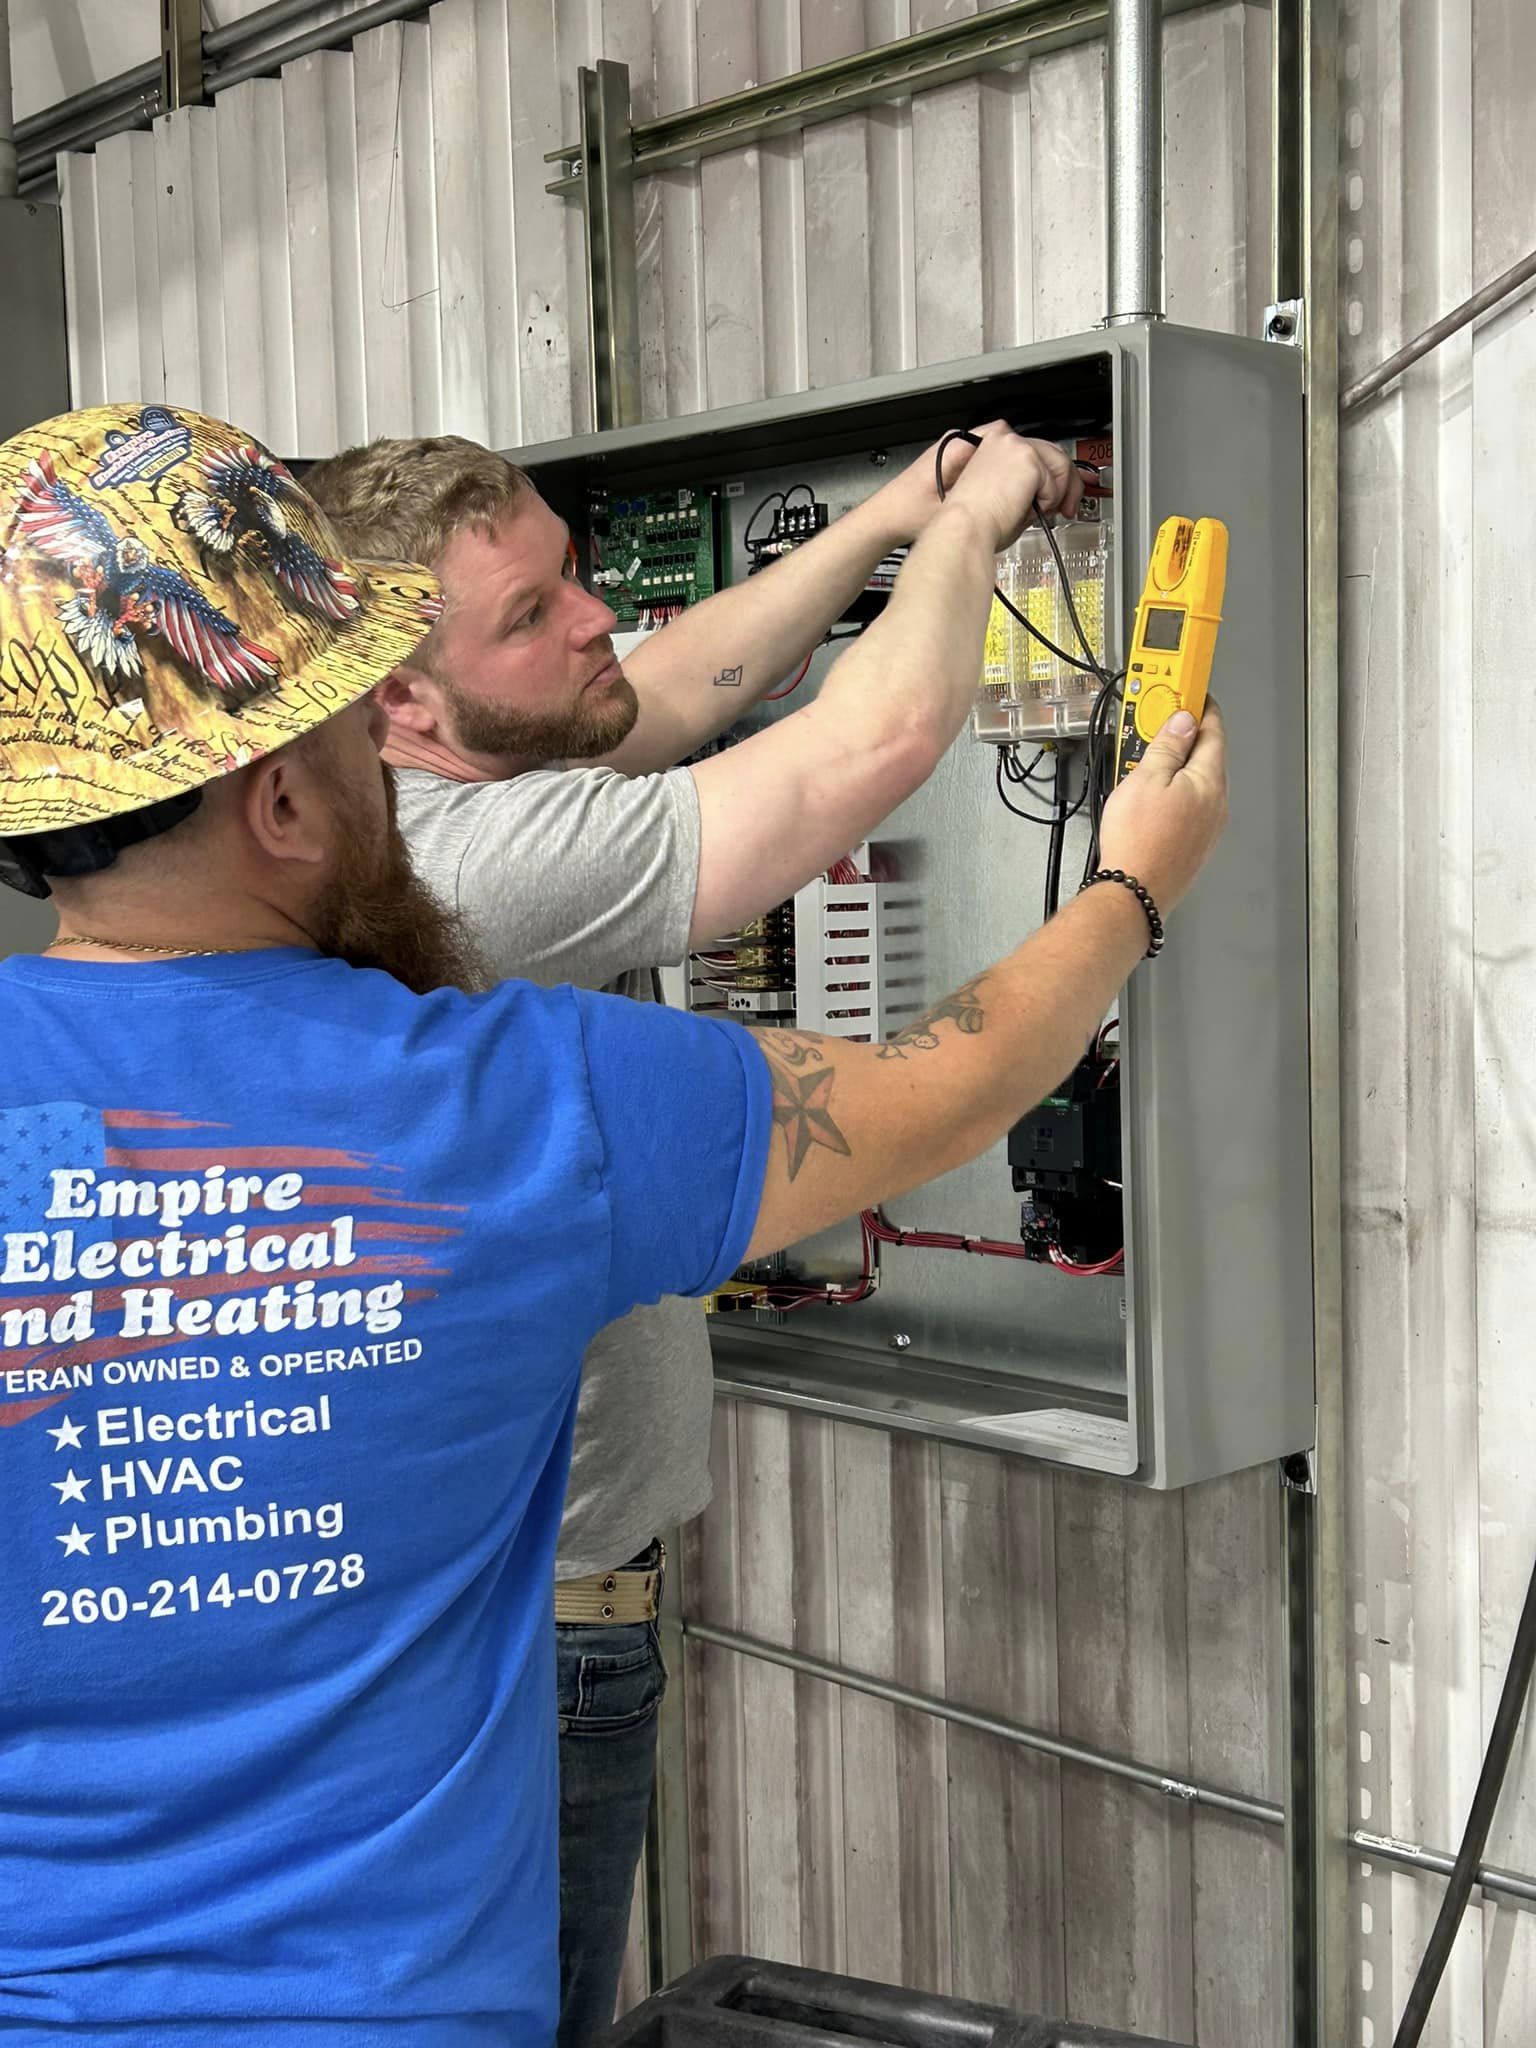 Empire Electric and heating 102 Lovette St, Wolcottville Indiana 46795